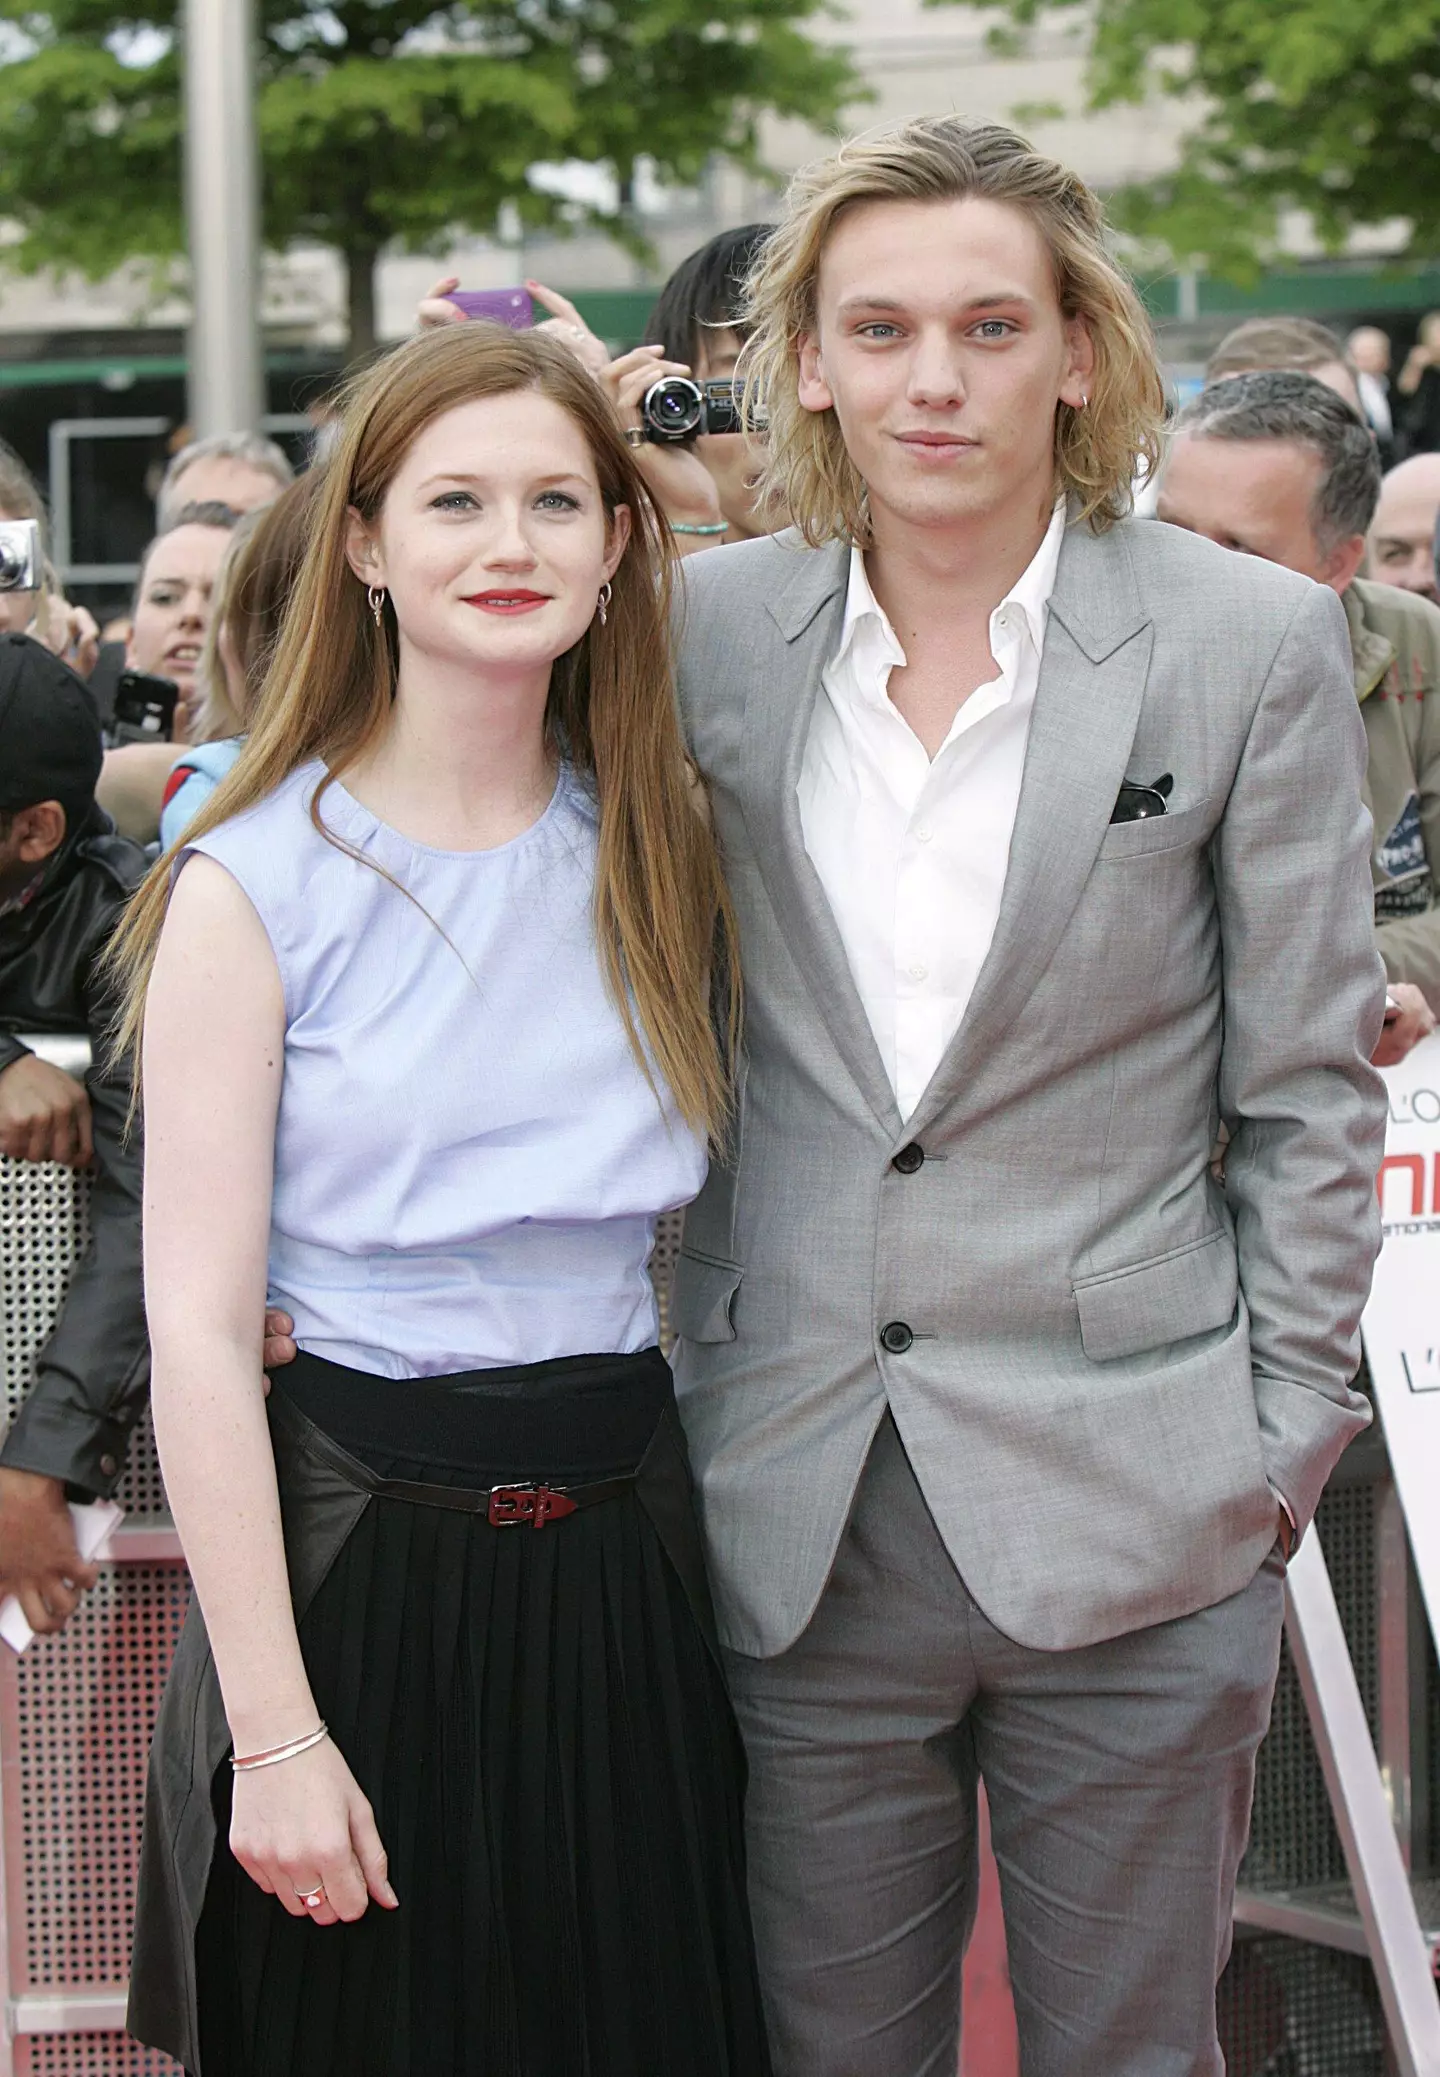 Bonnie, 31, was engaged to fellow actor Jamie Campbell Bower after they met filming The Deathly Hallows Part 1.